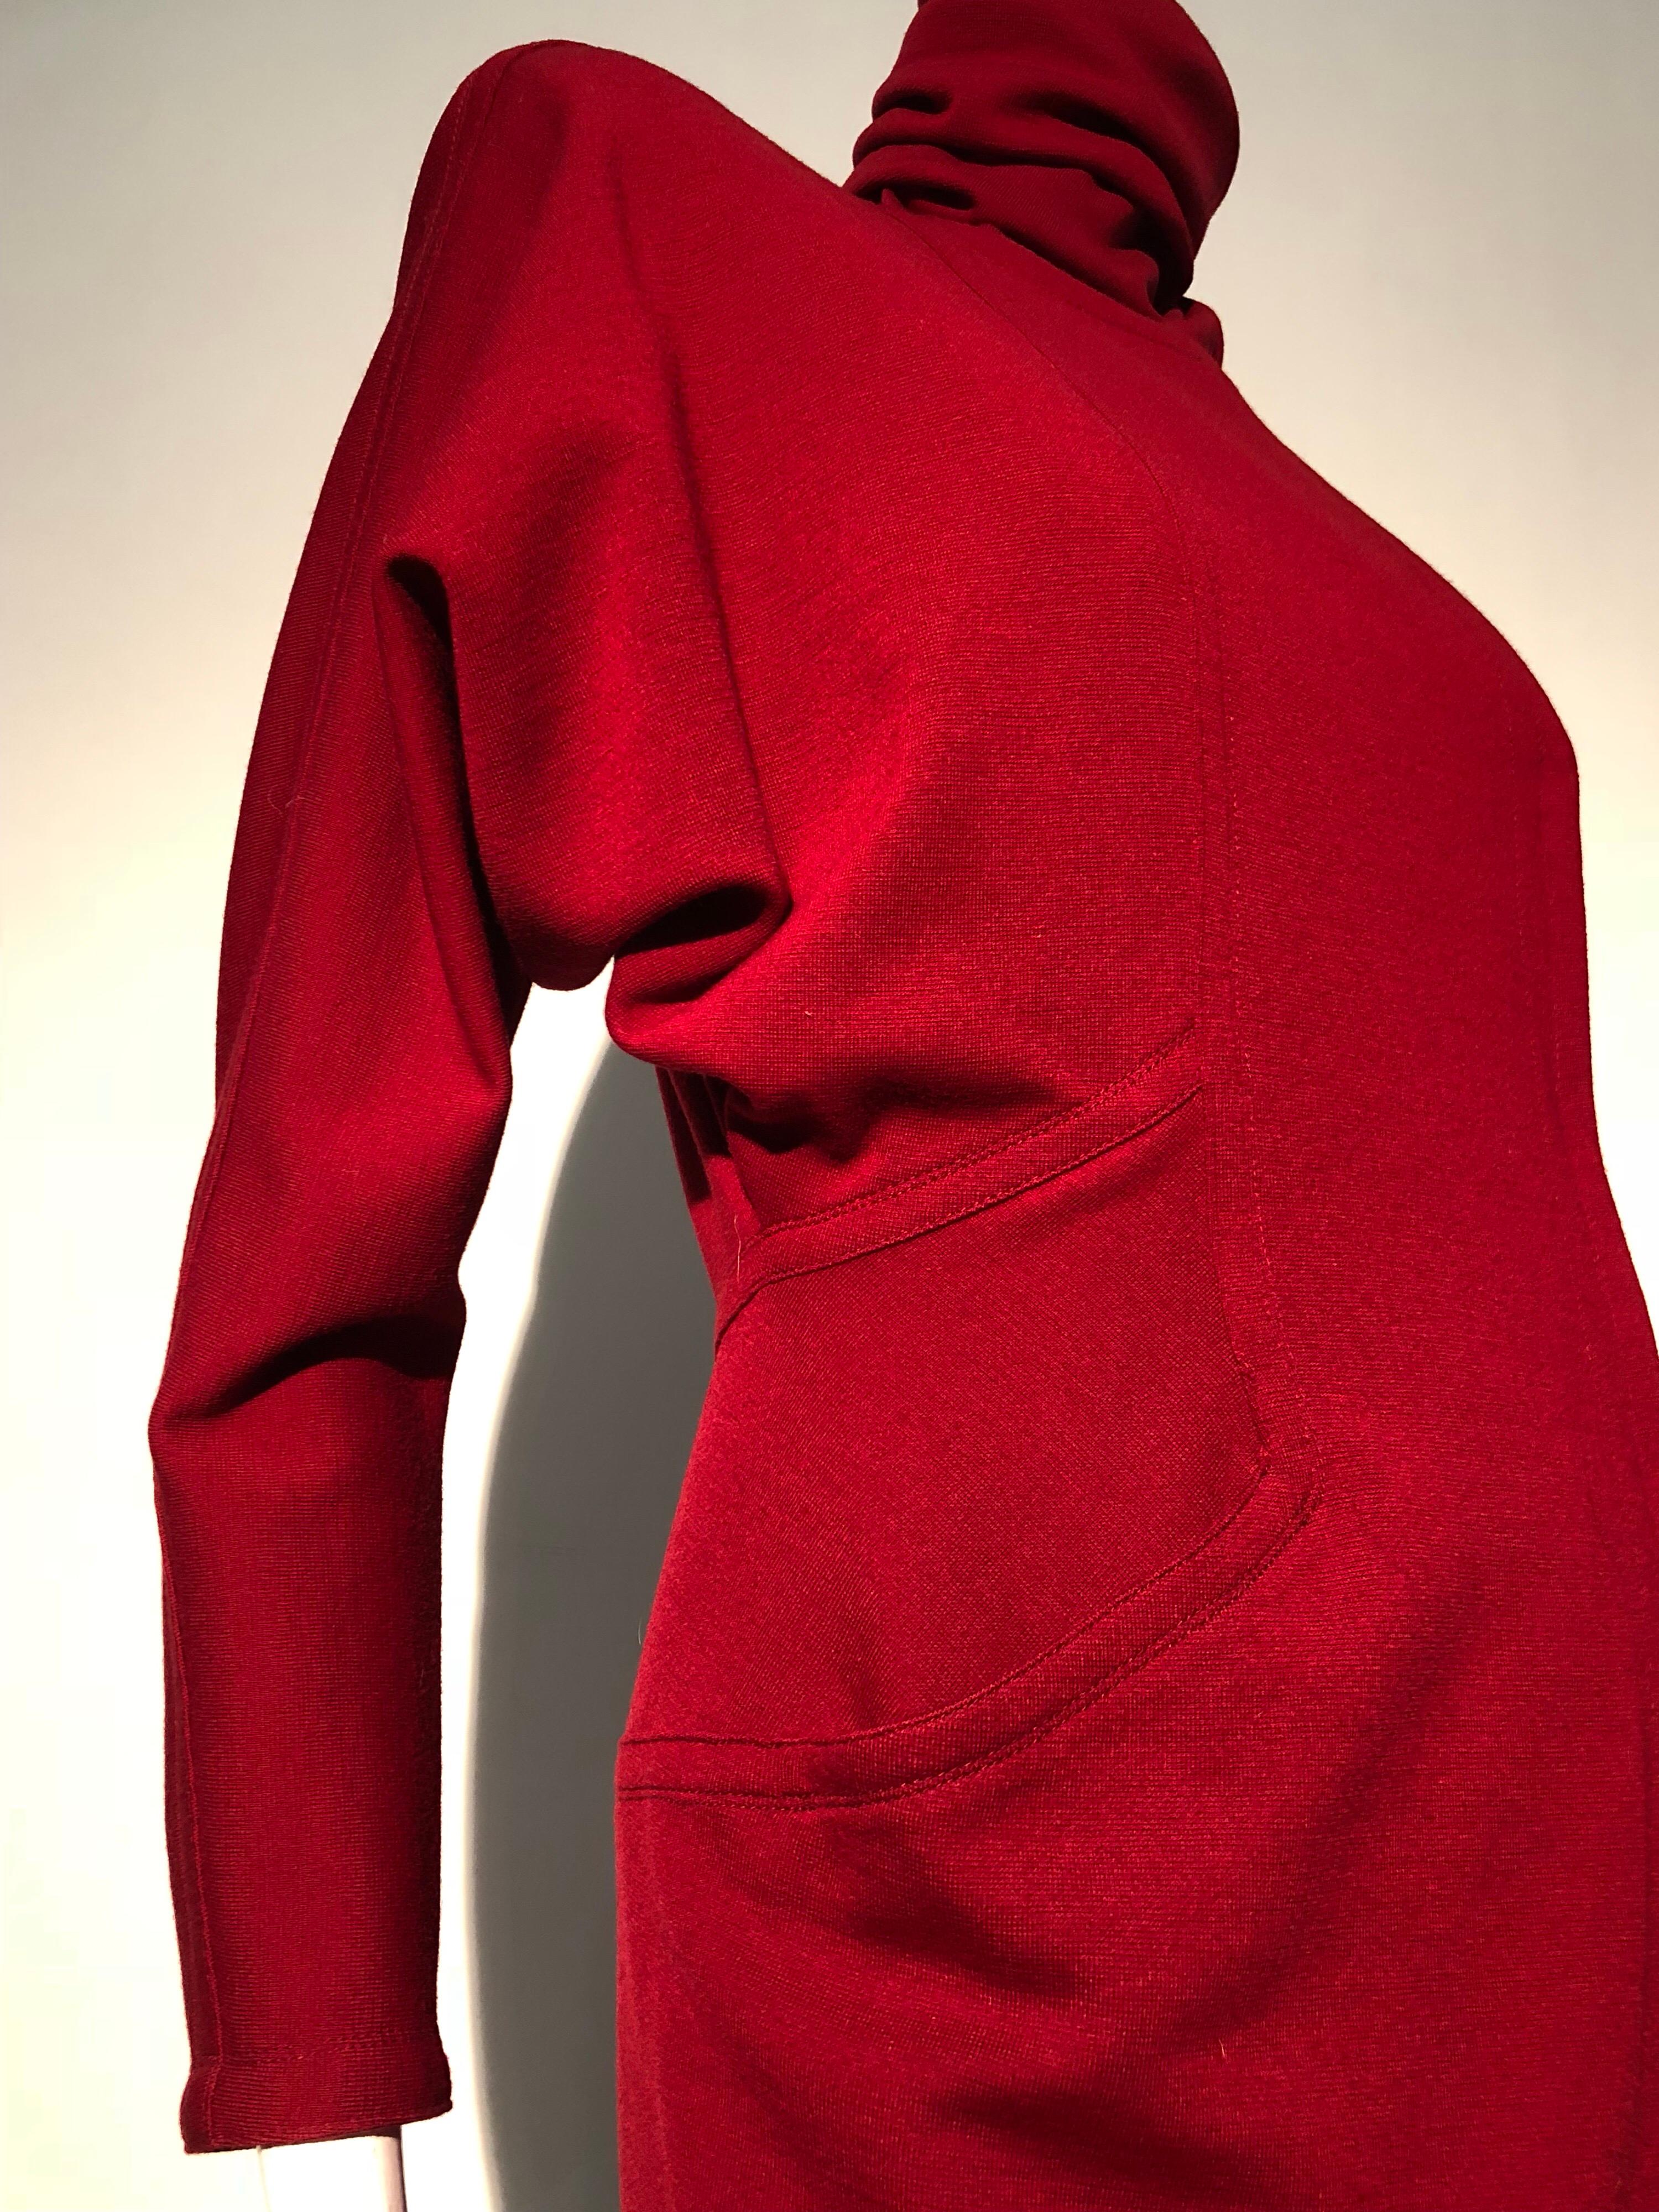 Women's 1980s Gianni Versace Vivid Red Wool Wrap-Style Coat Dress W/ Attached Foulard For Sale